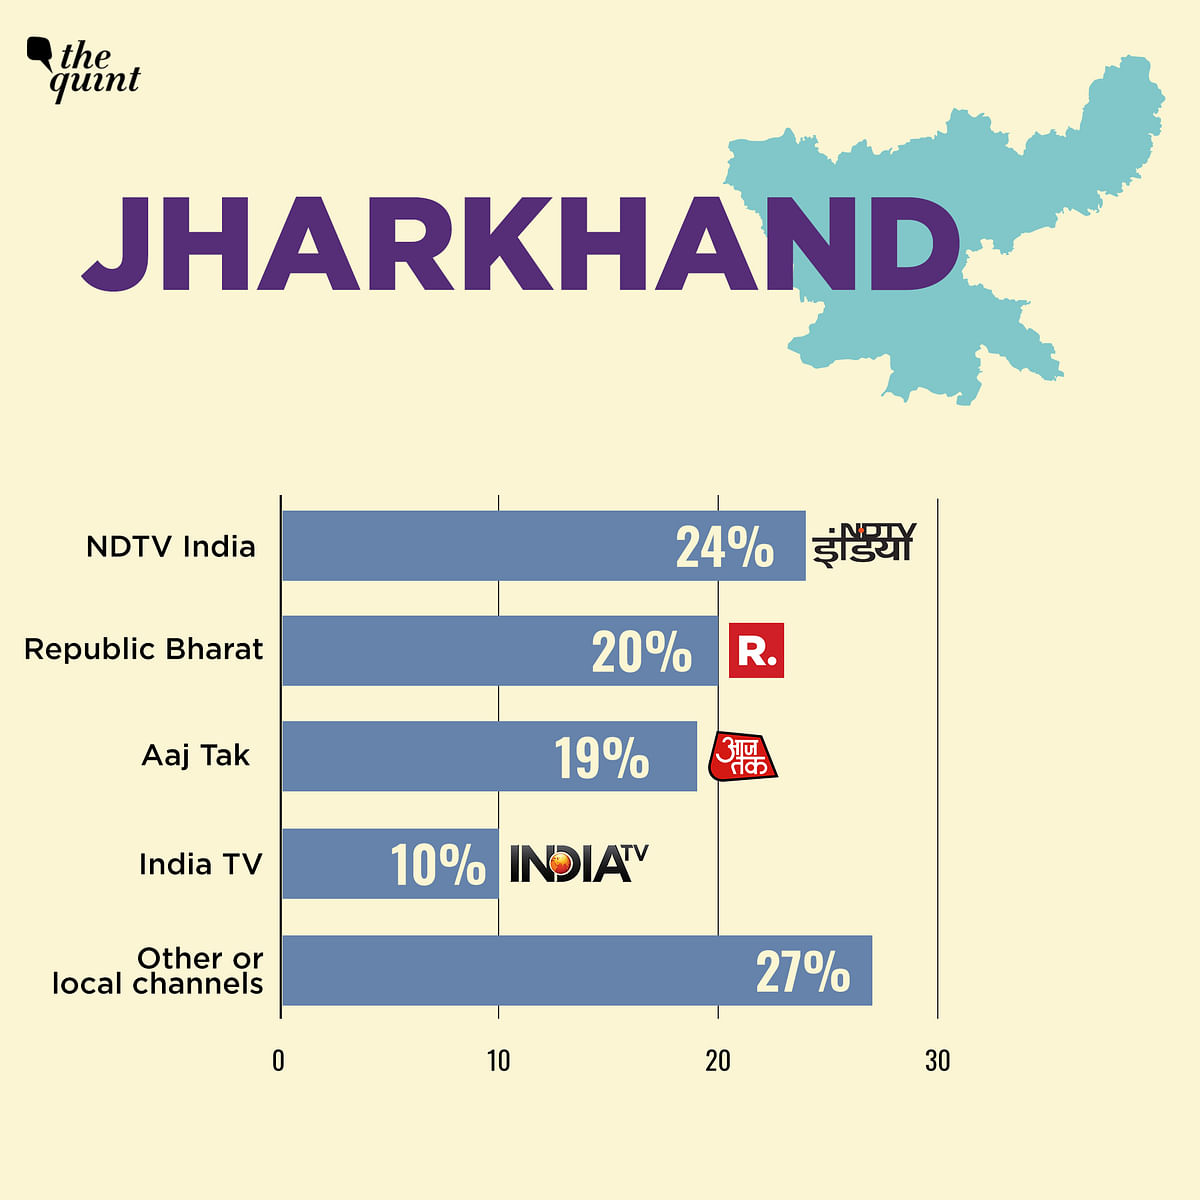 The survey by Prashnam was conducted on 9 October across the states of Bihar, Madhya Pradesh, Rajasthan & Jharkhand.